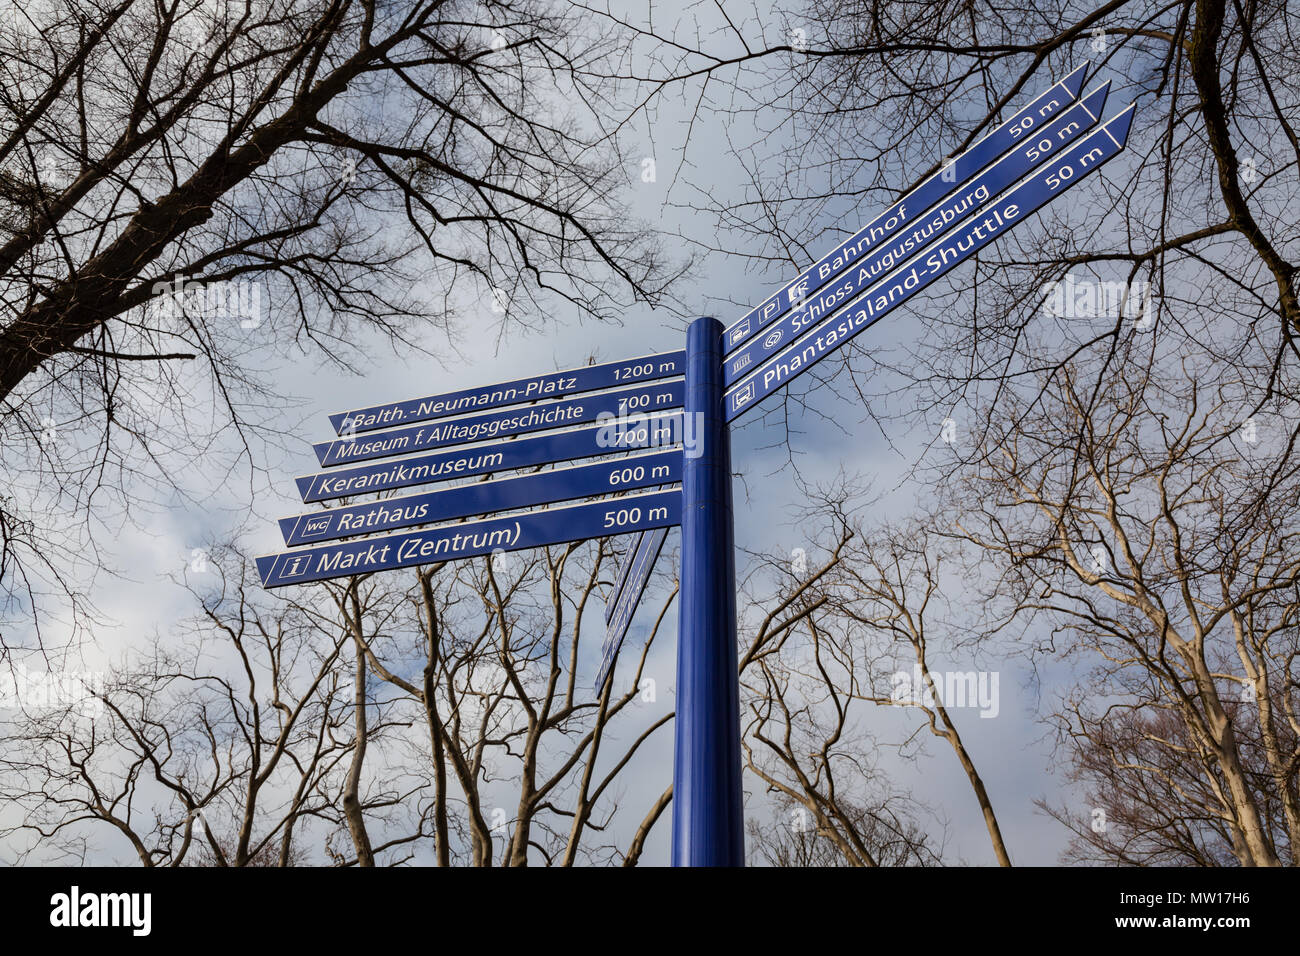 Sign post with 8 blue direction signs in Bruehl, Germany Stock Photo